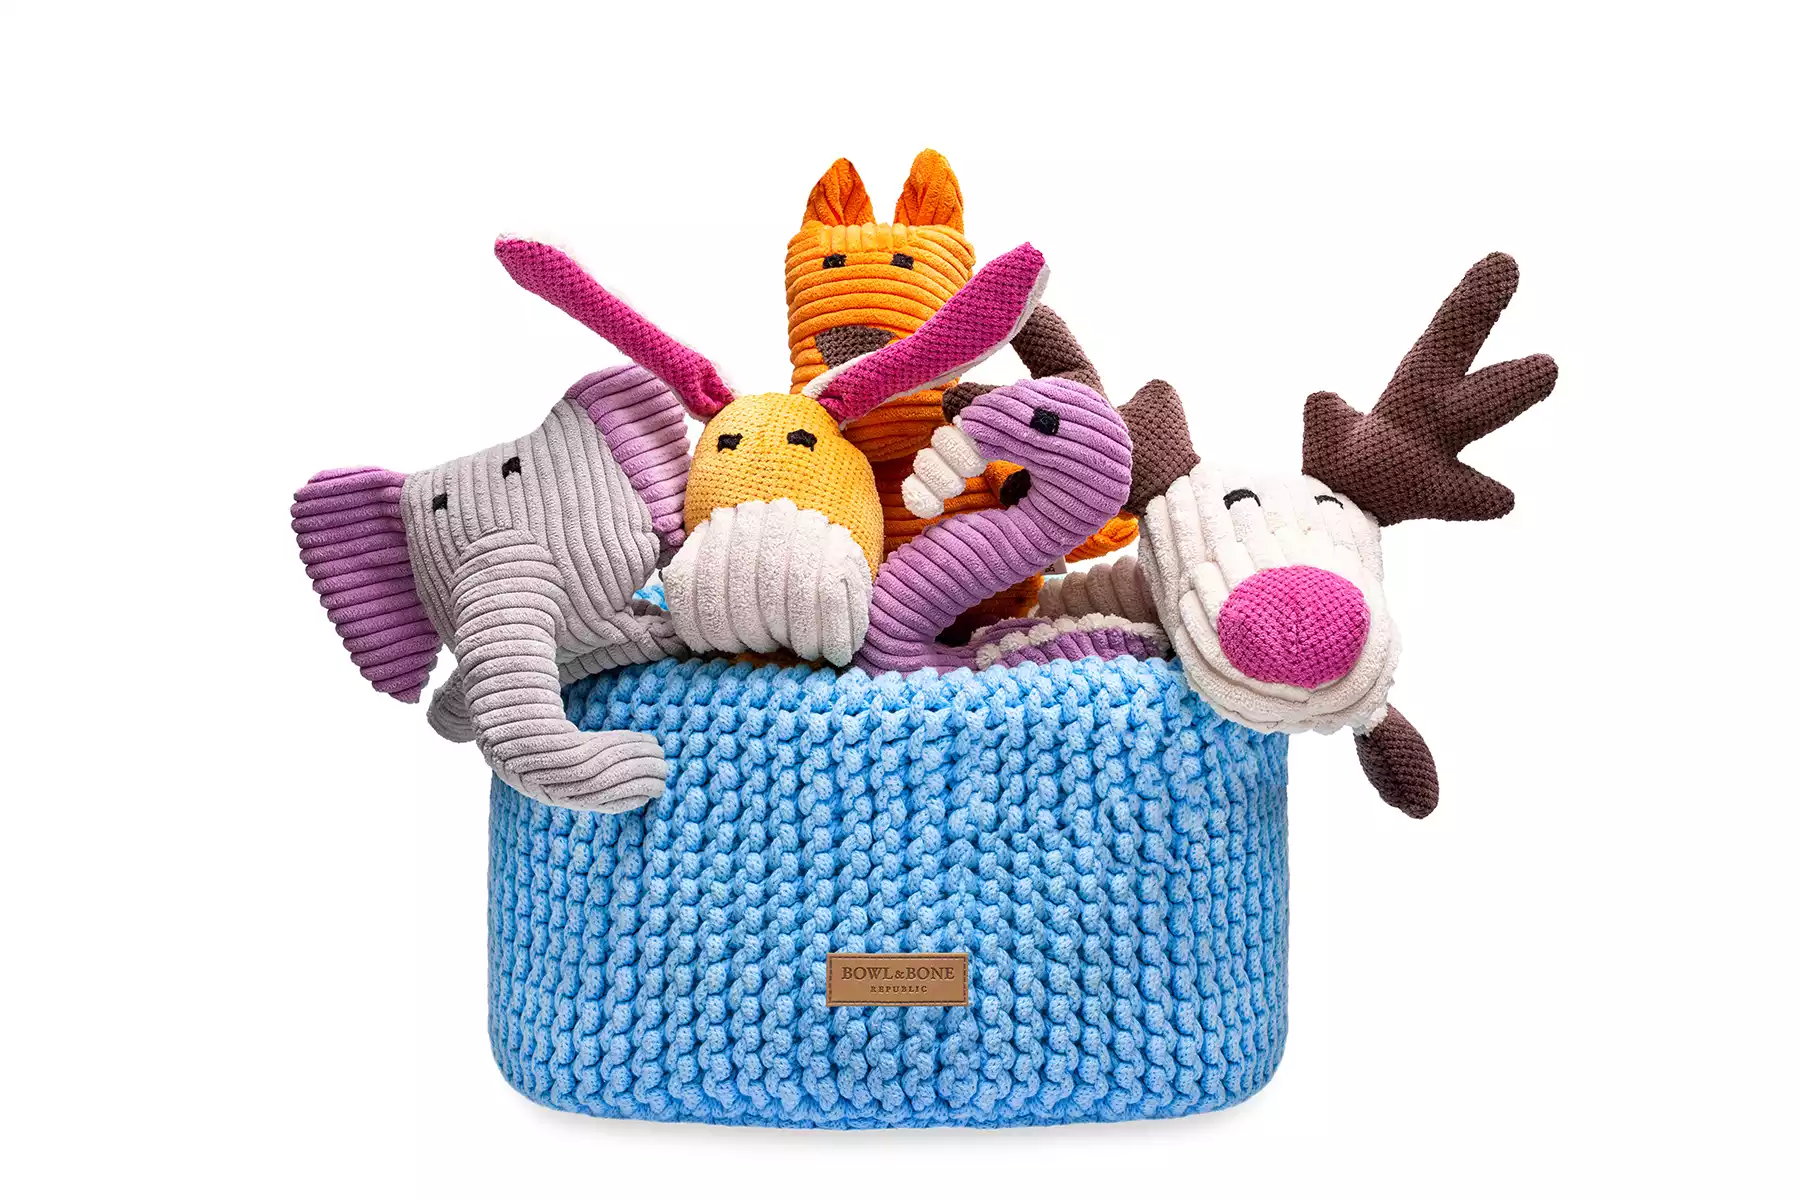 cottom blue dog toy basket with toys